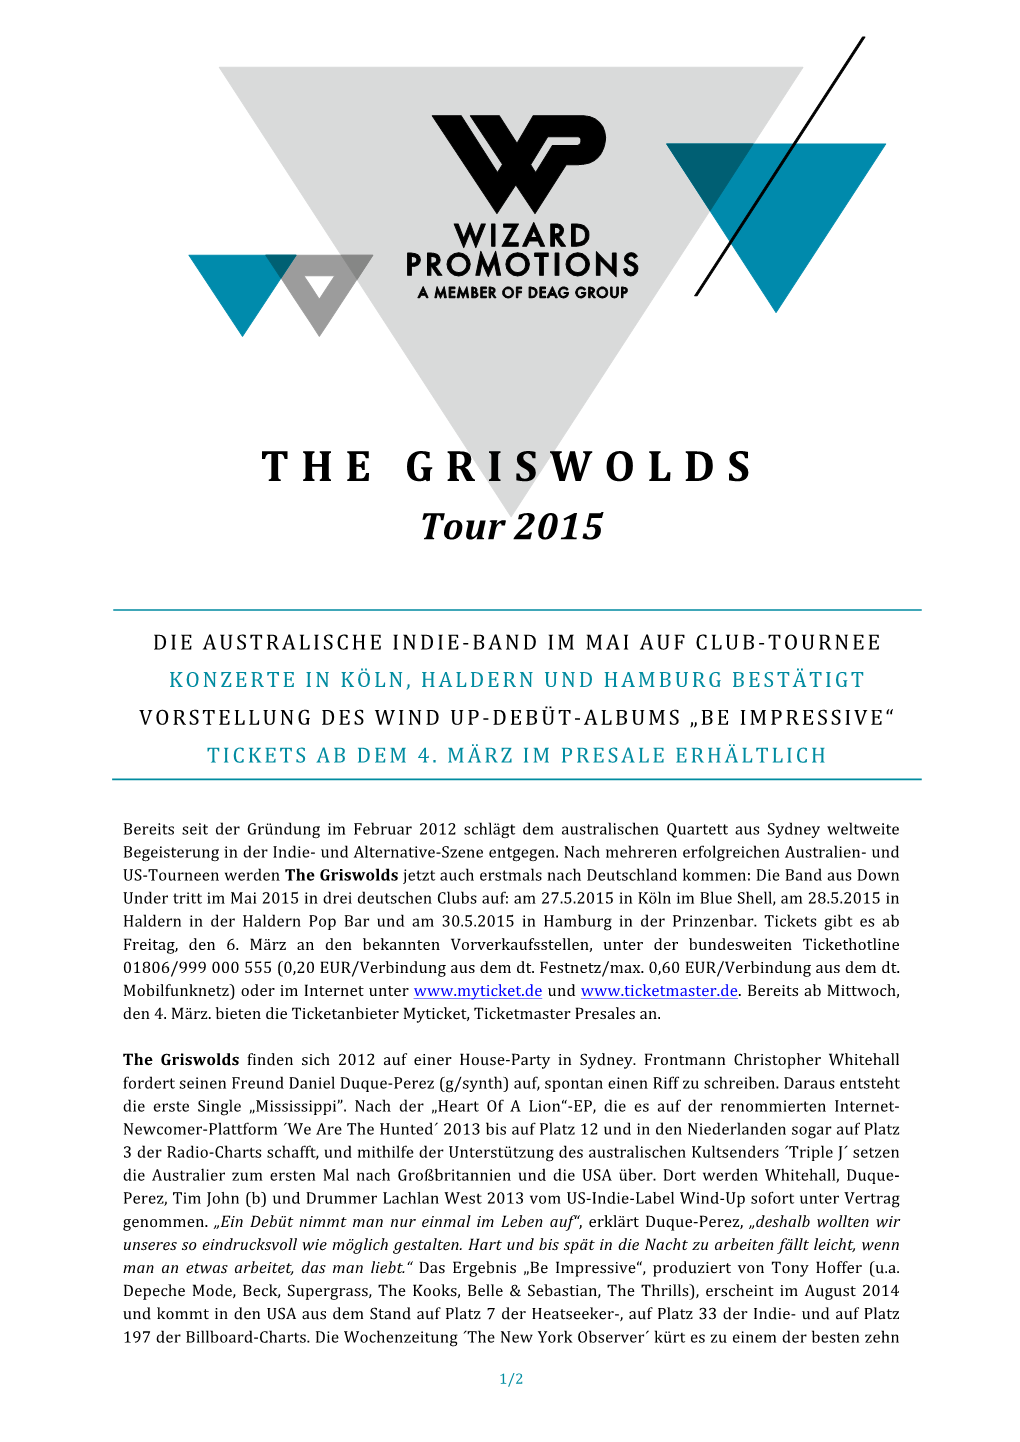 THE GRISWOLDS Tour 2015